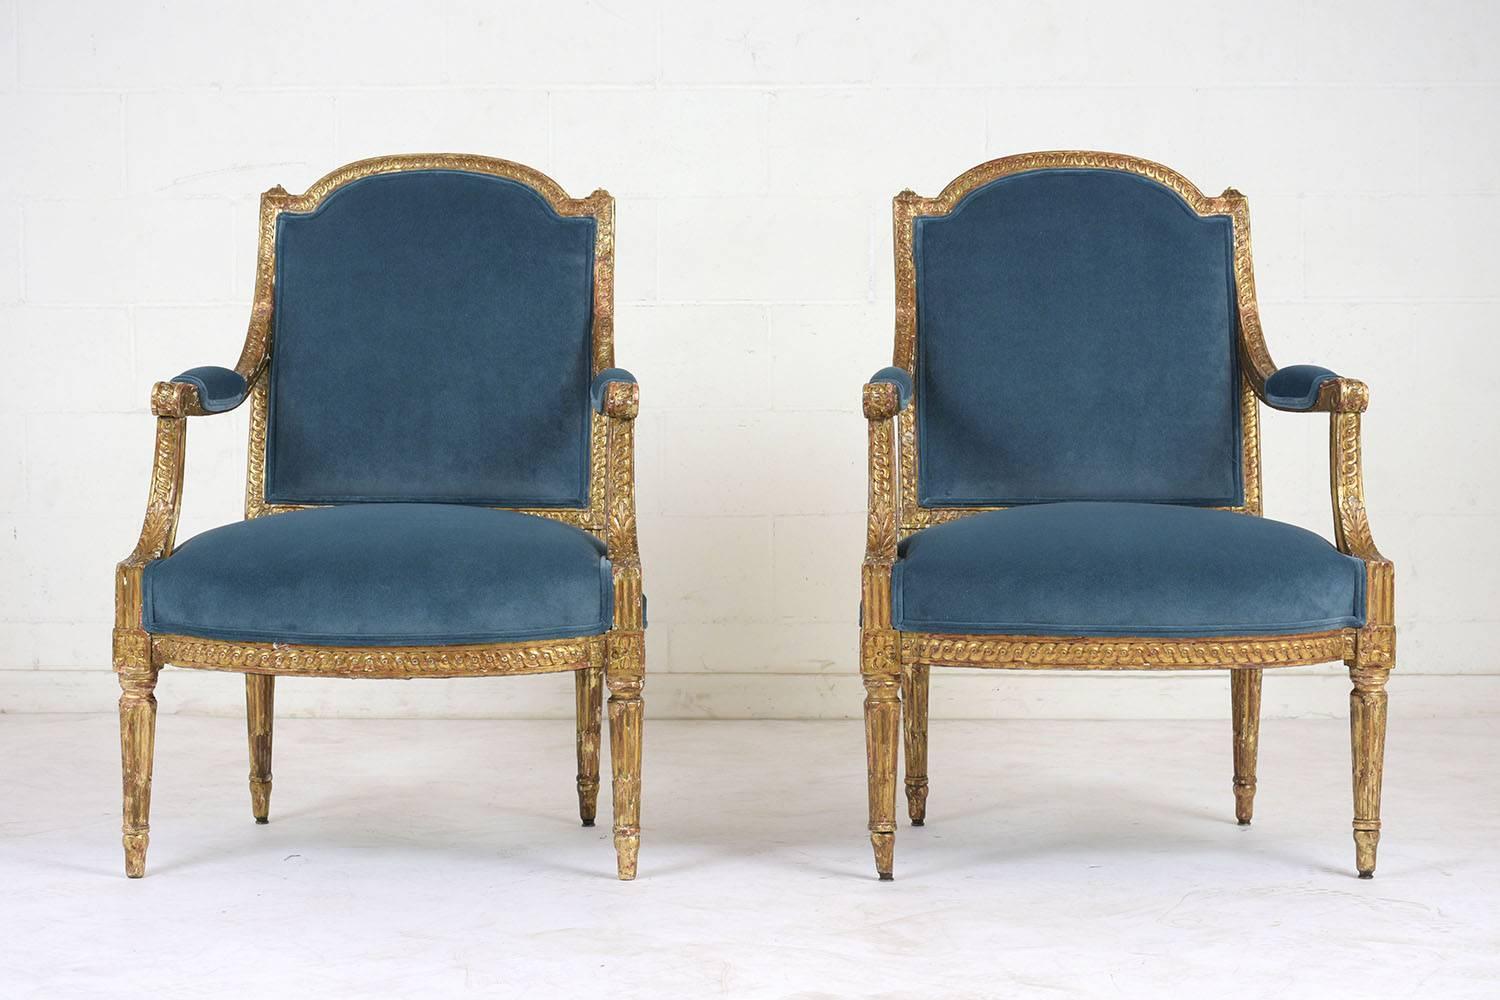 This pair of French Louis XVI style bergères dates to the 1860s. The carved frames are made of gilt wood with a beautiful distressed finish. The frames are adorned with decorative motifs, acanthus leaves, rosettes, and fluting. The seats have been